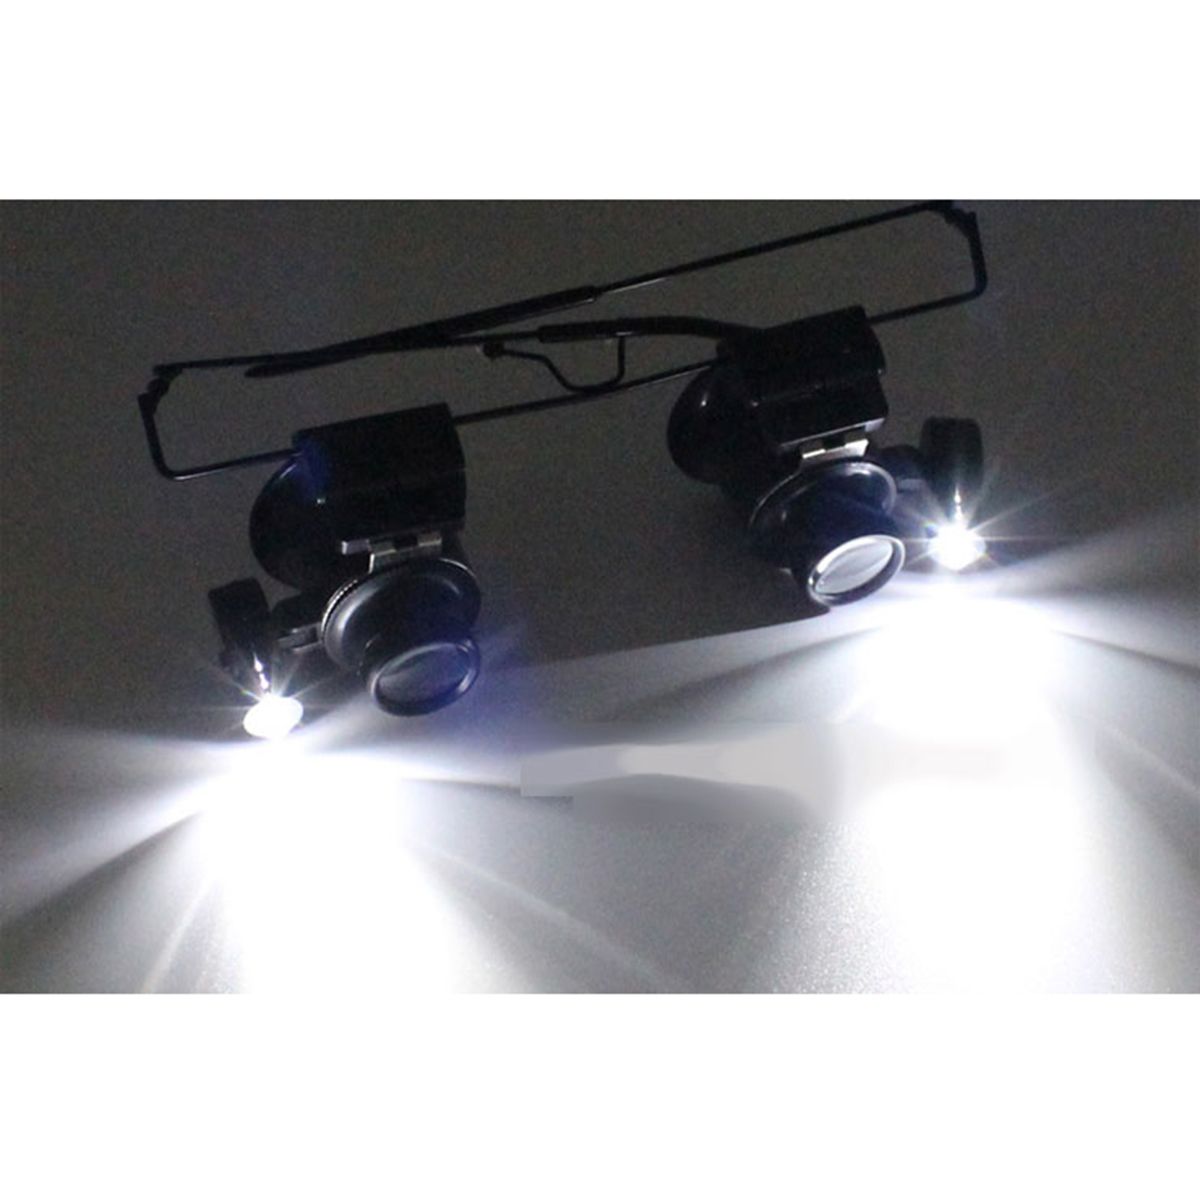 LED-20X-Magnifier-Magnifying-Dual-Eye-Glasses-Loupe-Lens-Jeweler-Watch-Repair-1625713